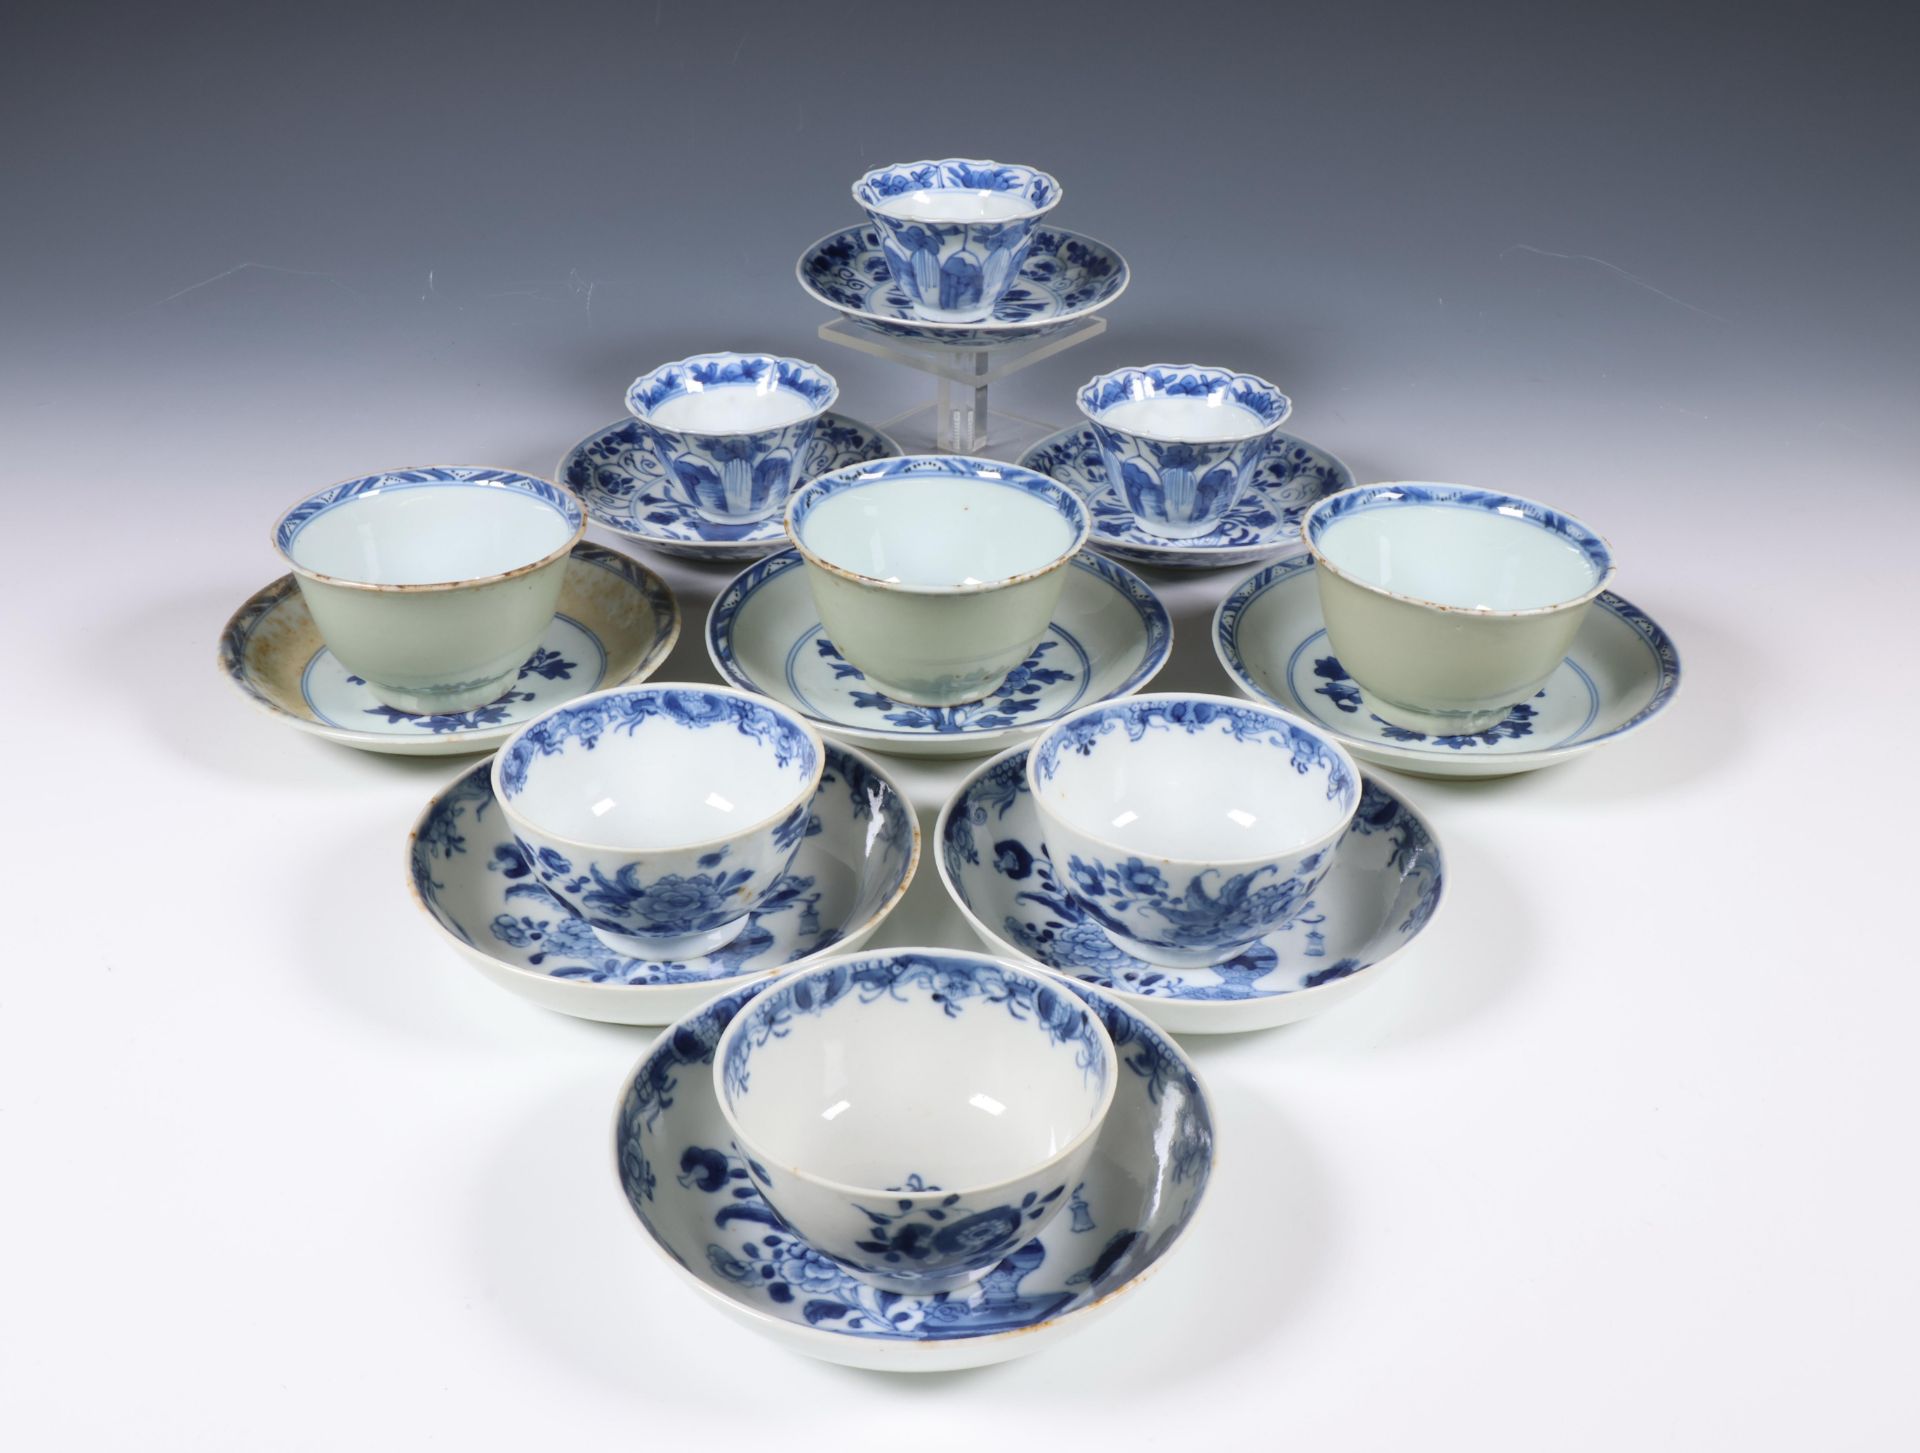 China, collection of blue and white porcelain 'floral' cups and saucers, Kangxi period (1662-1722) a